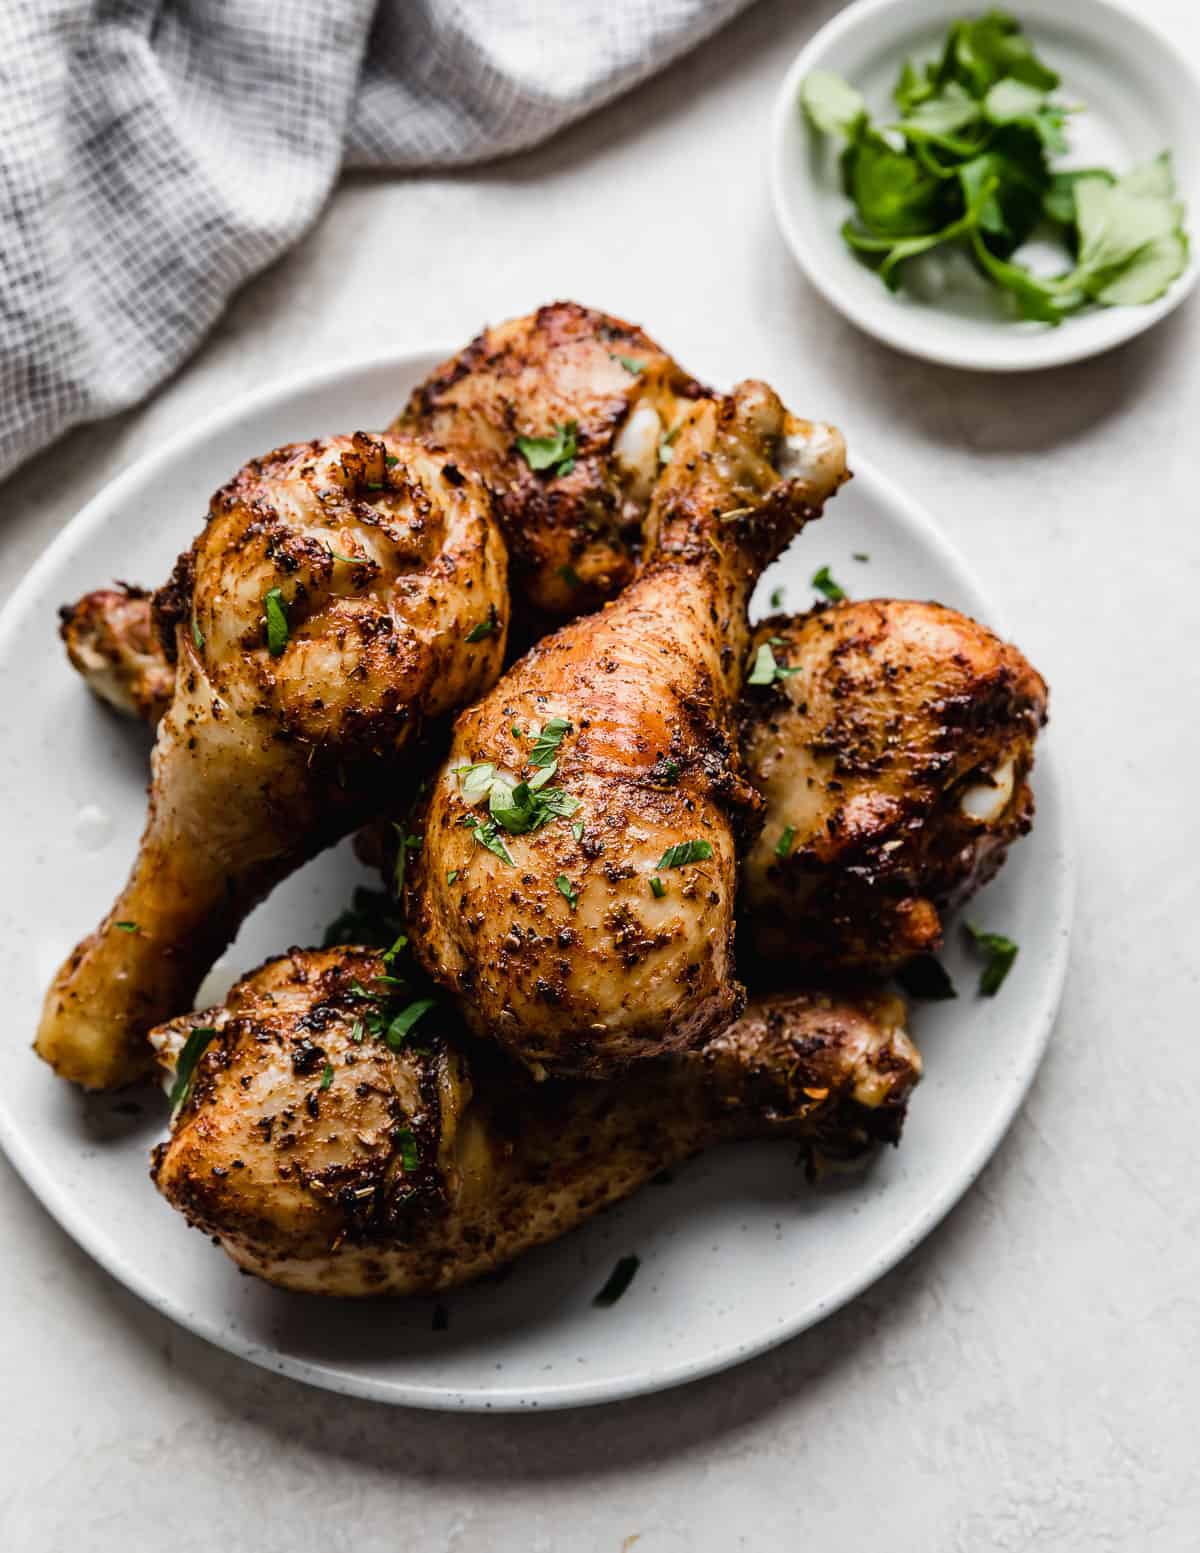 Golden and crispy Air Fryer Chicken Legs on a white plate garnished with fresh parsley.